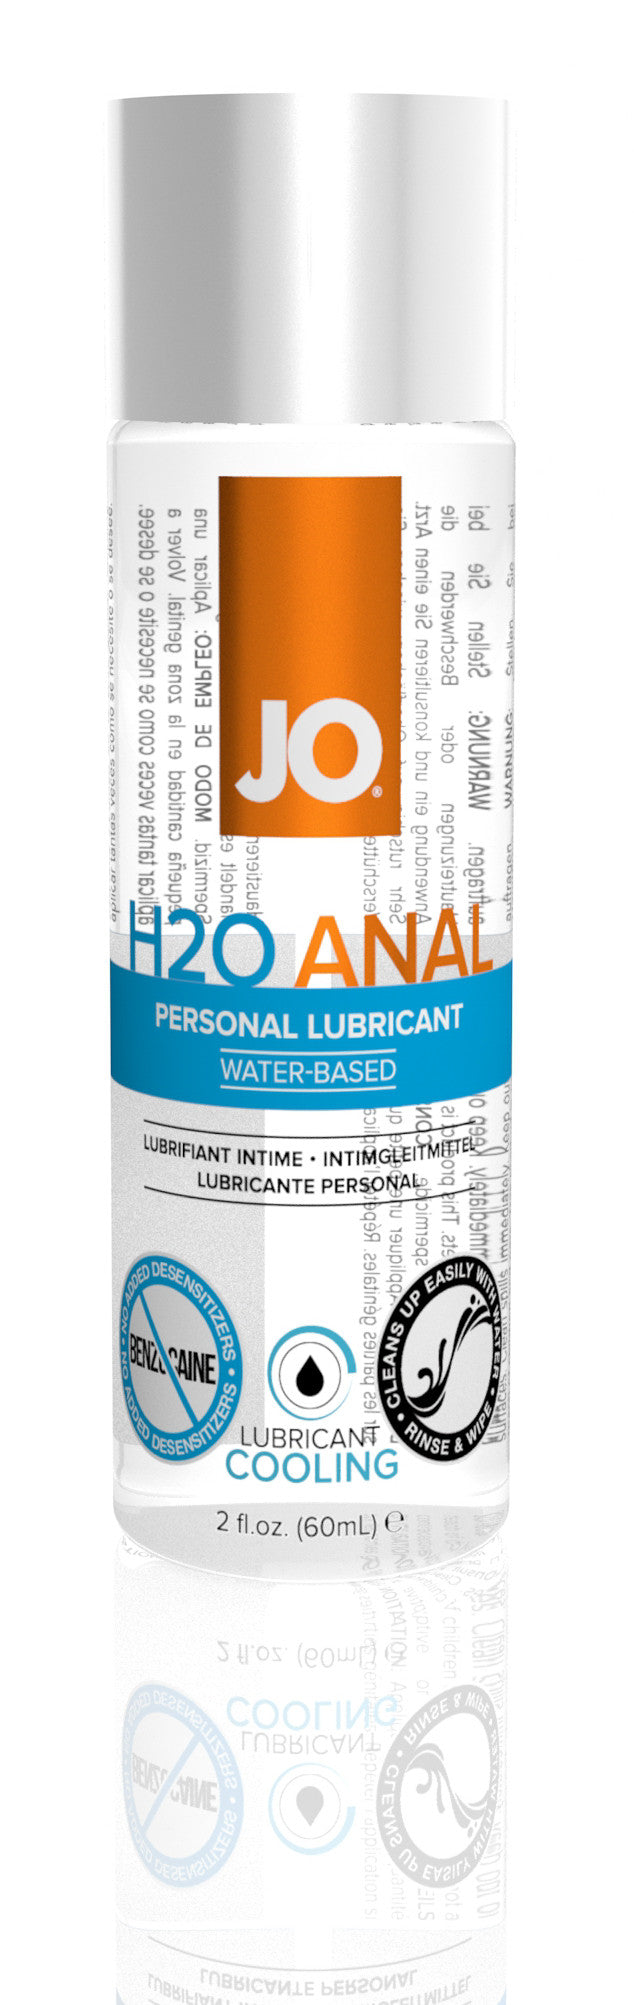 Jo H2O Anal Water-Based Cooling Lubricant - 2 Fl. Oz. / 60 ml